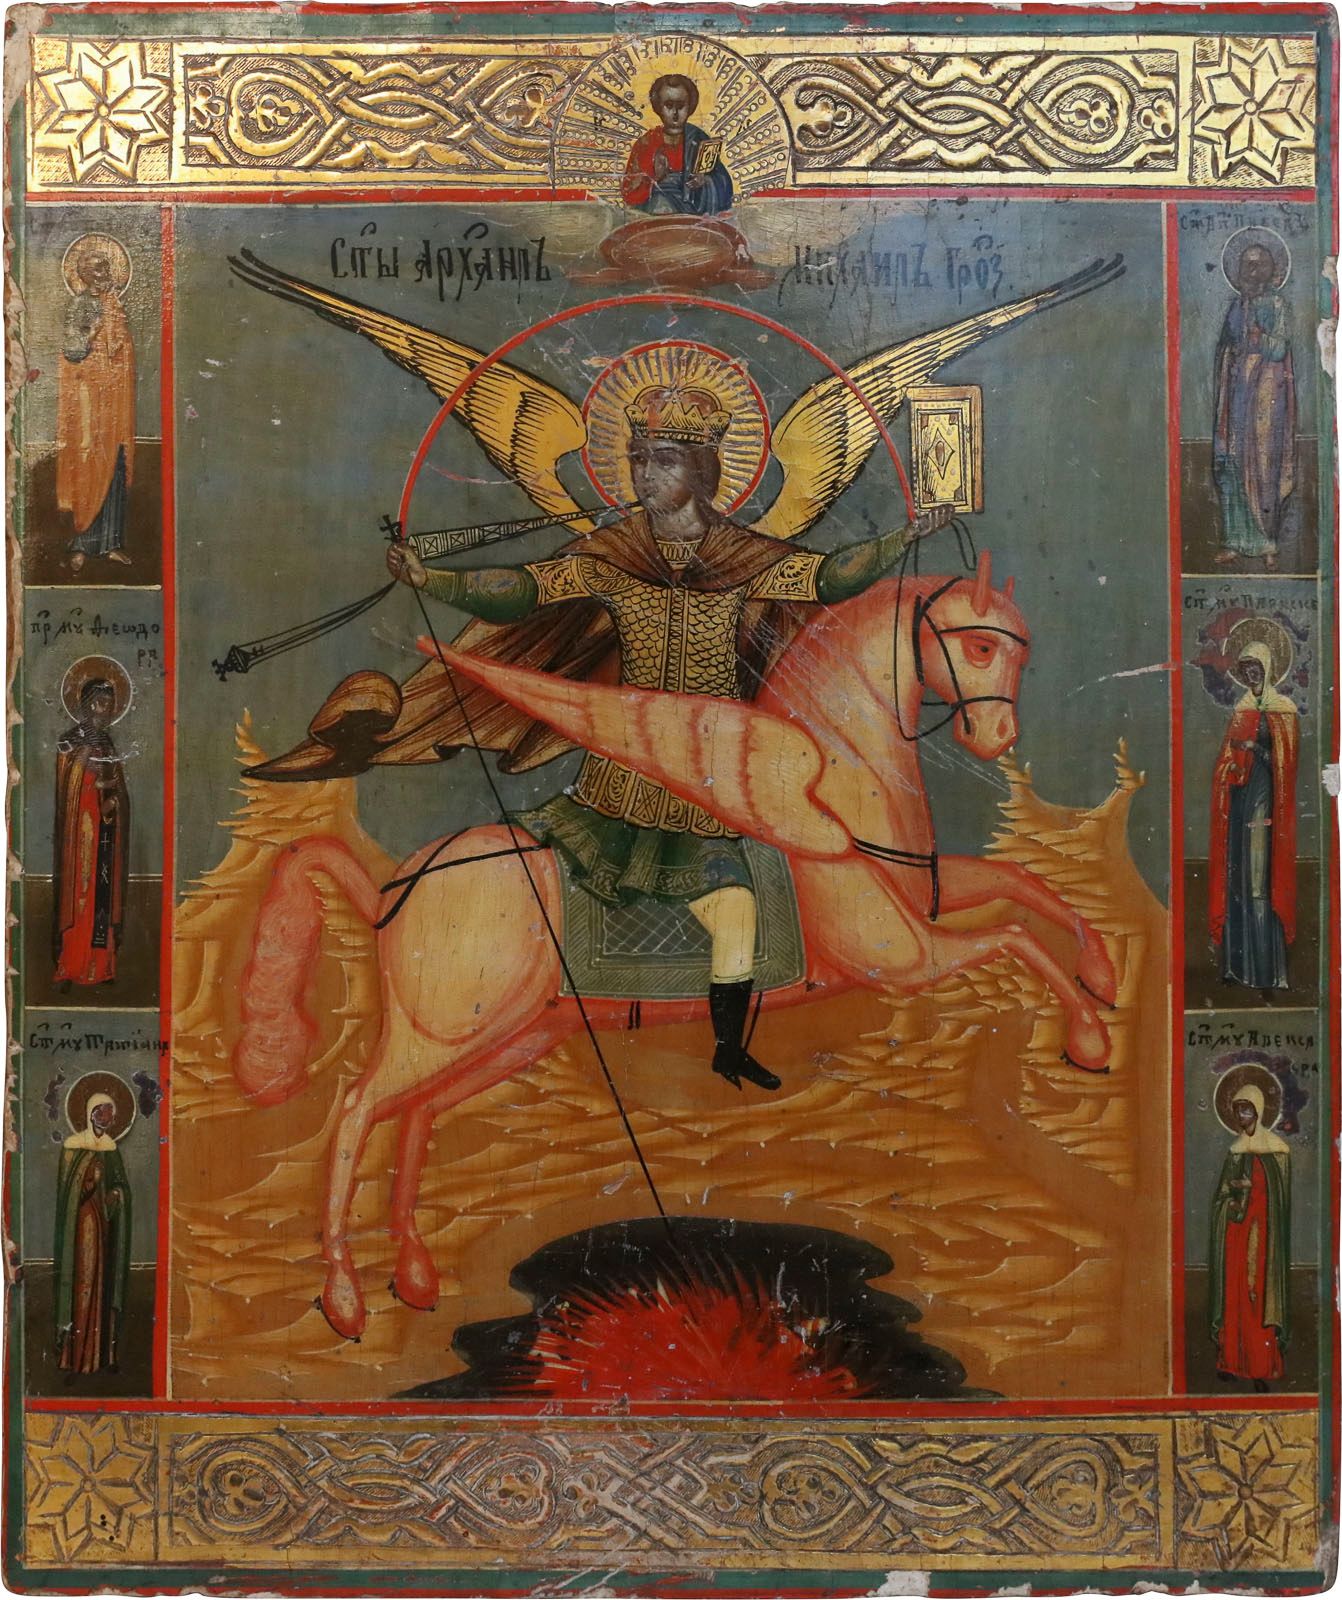 AN ICON SHOWING THE ARCHANGEL MICHAEL AS HORSEMAN OF THE AP 俄罗斯，19世纪末，木板上的淡彩画，显示&hellip;